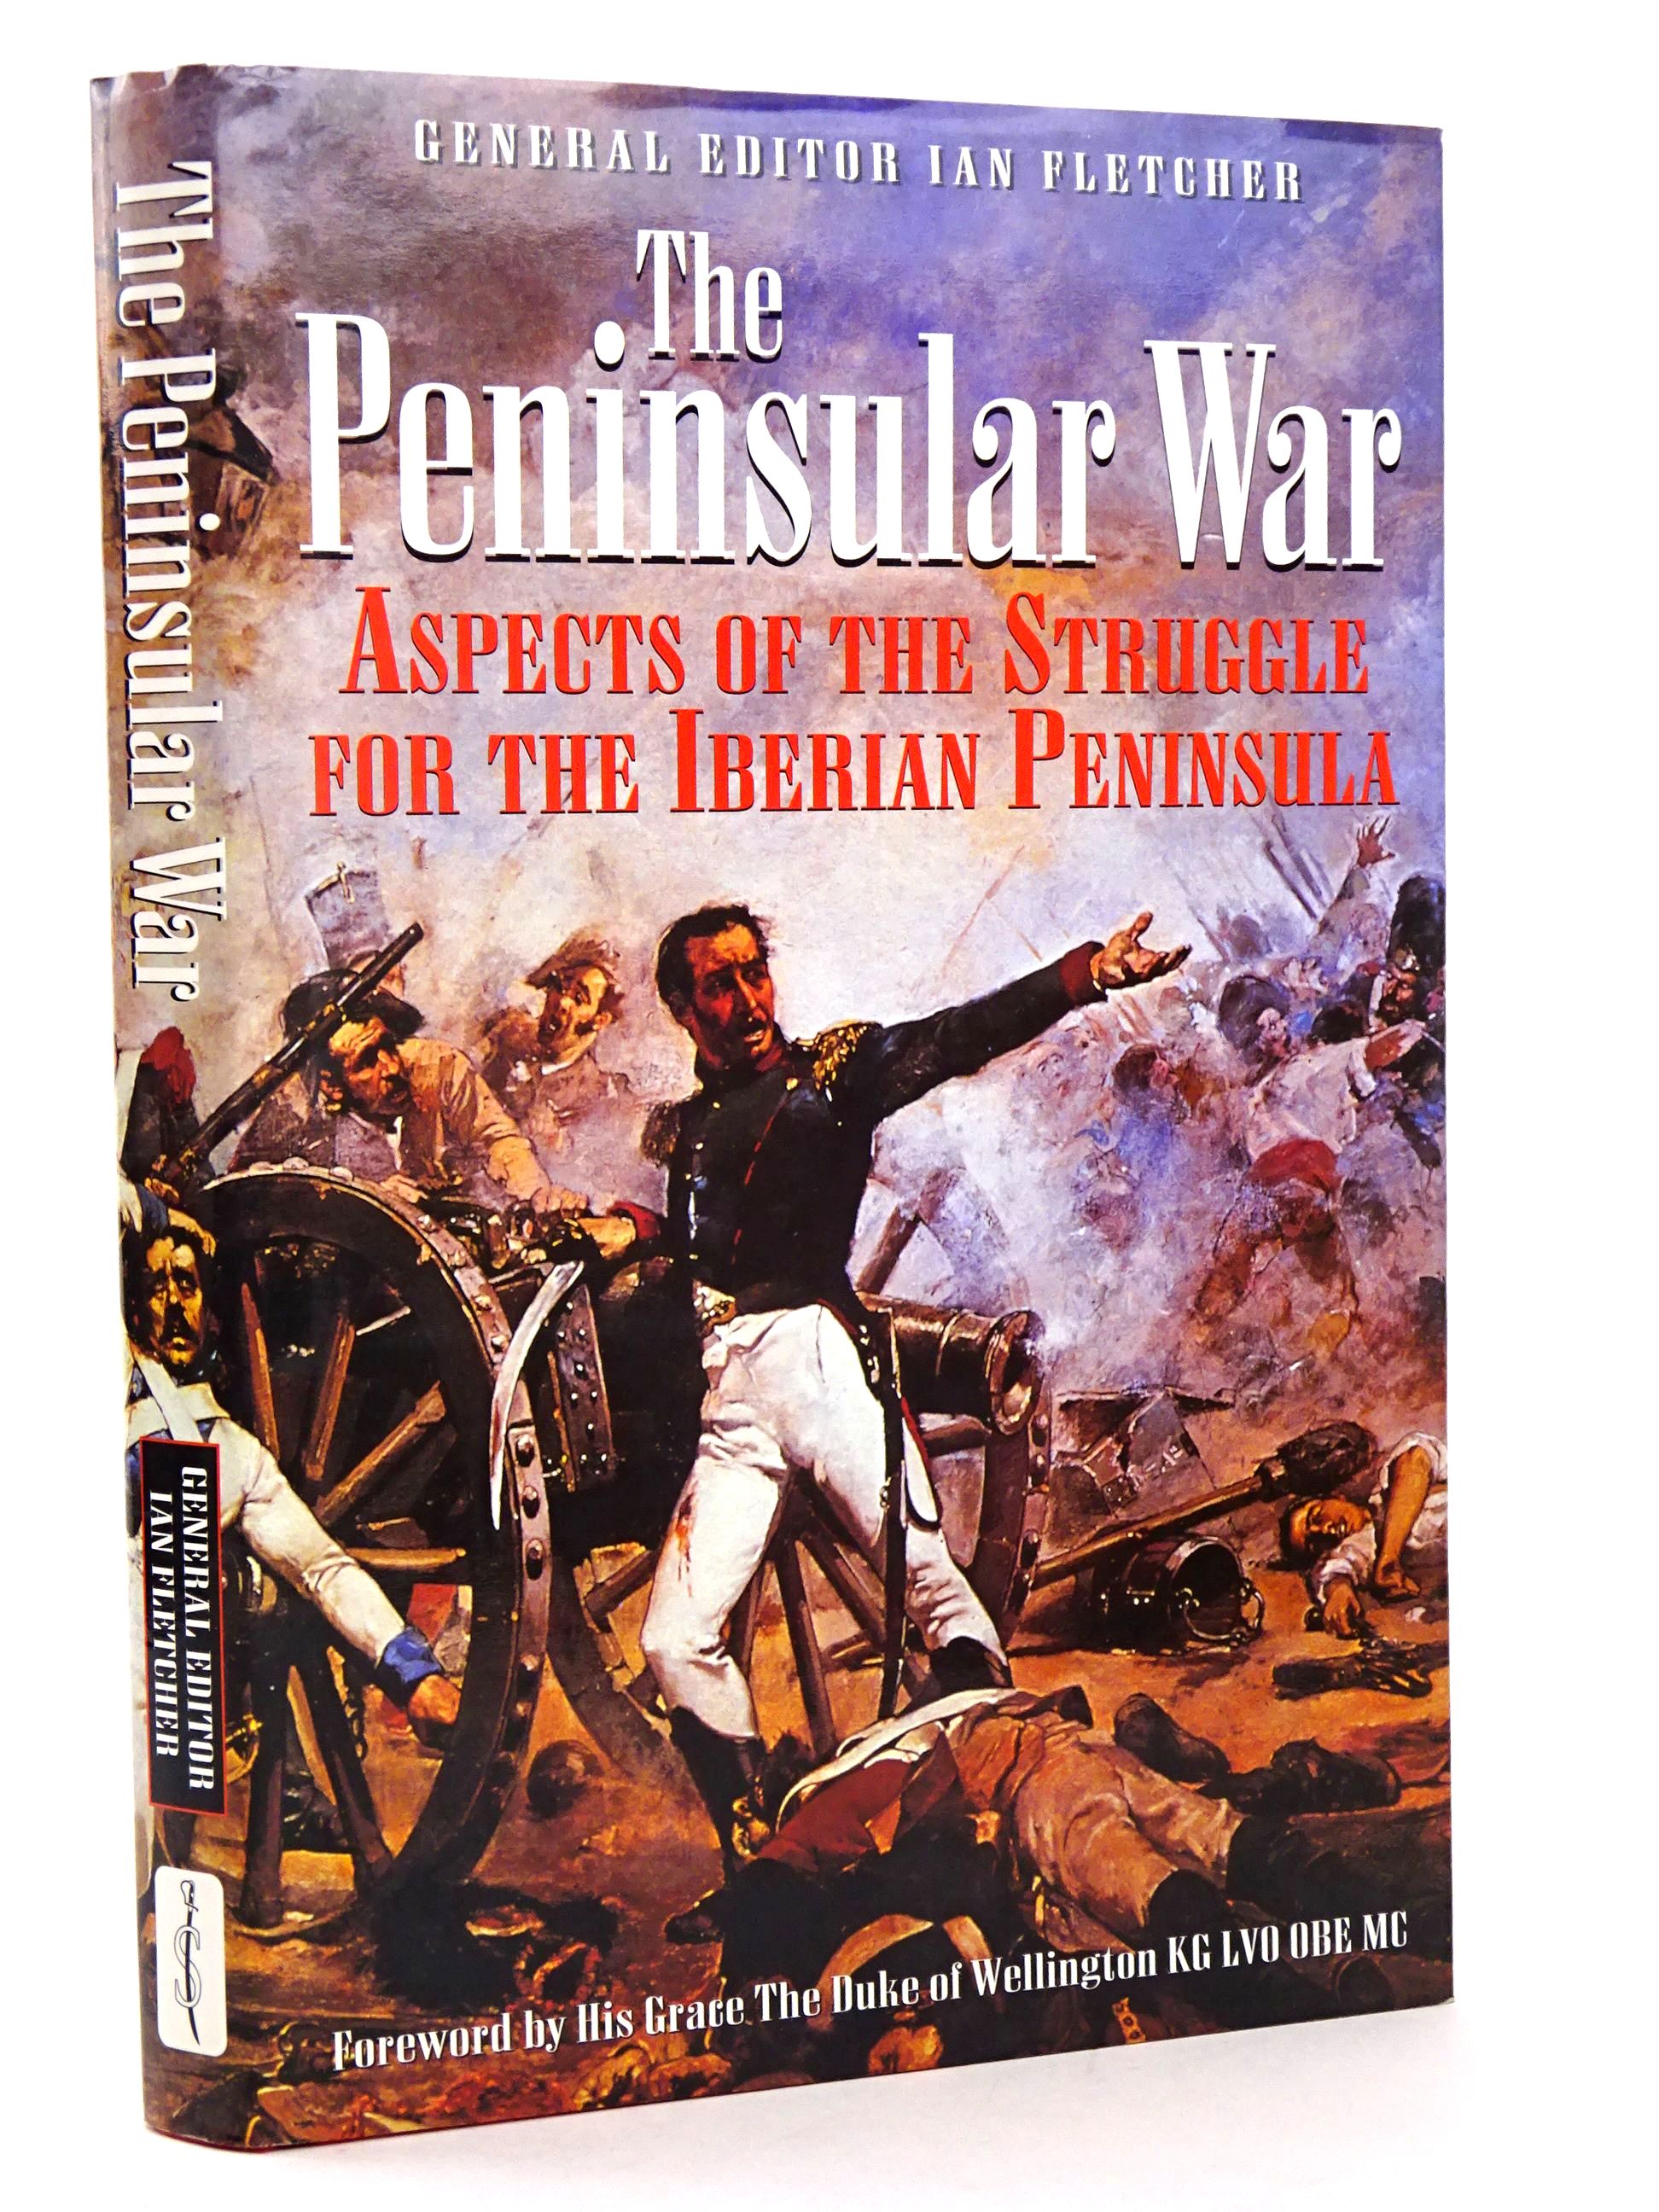 Photo of THE PENINSULAR WAR: ASPECTS OF THE STRUGGLE FOR THE IBERIAN PENINSULA written by Fletcher, Ian published by Spellmount Ltd. (STOCK CODE: 1818468)  for sale by Stella & Rose's Books